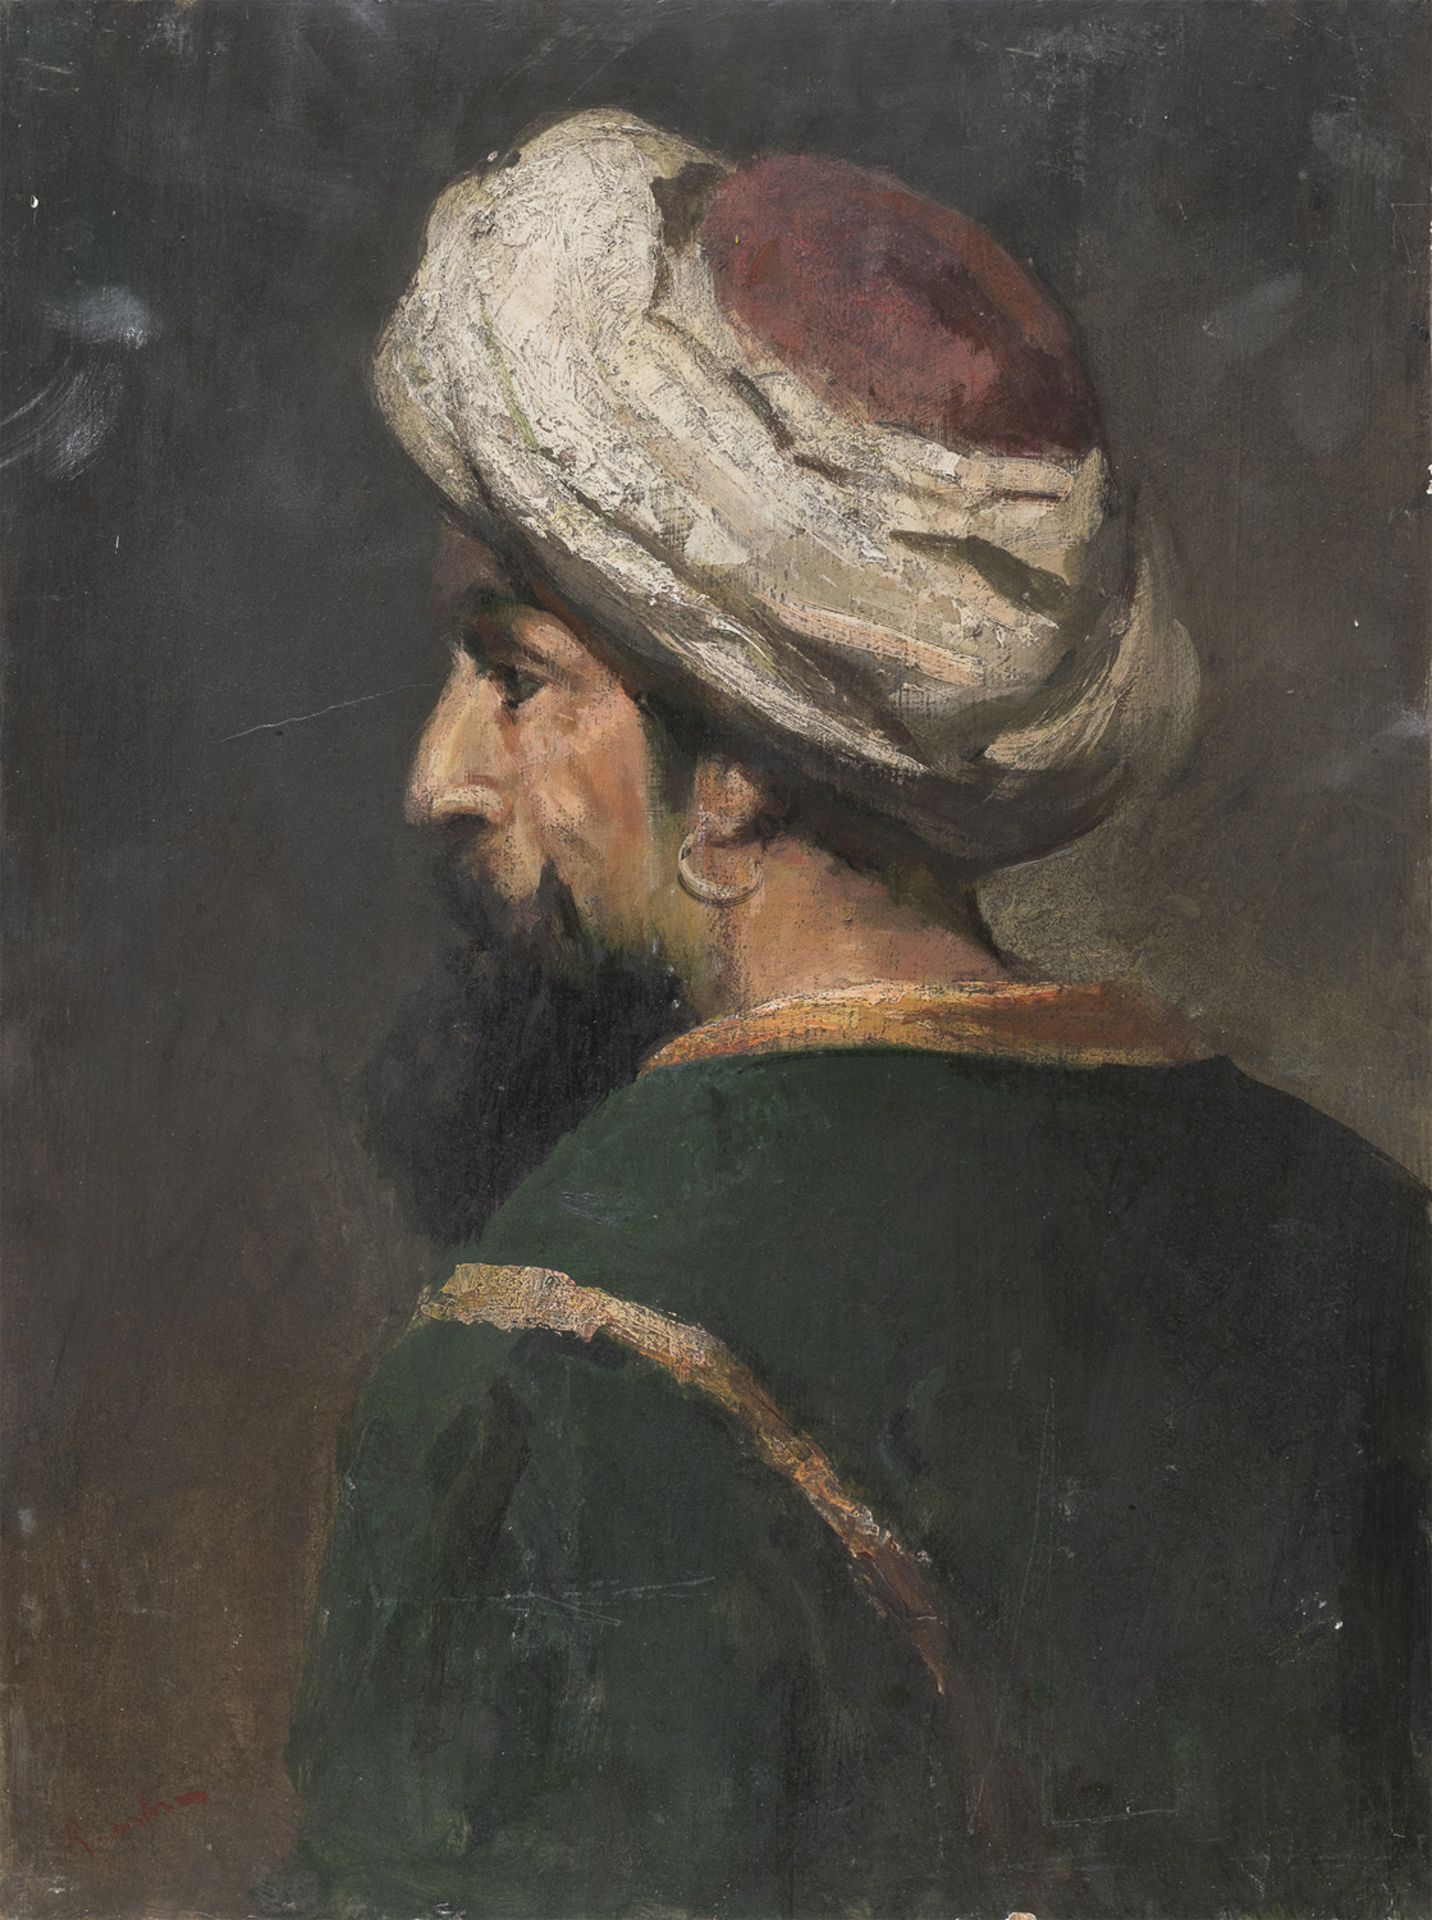 OIL PAINTING OF A MAN WITH TURBAN EARLY 20TH CENTURY